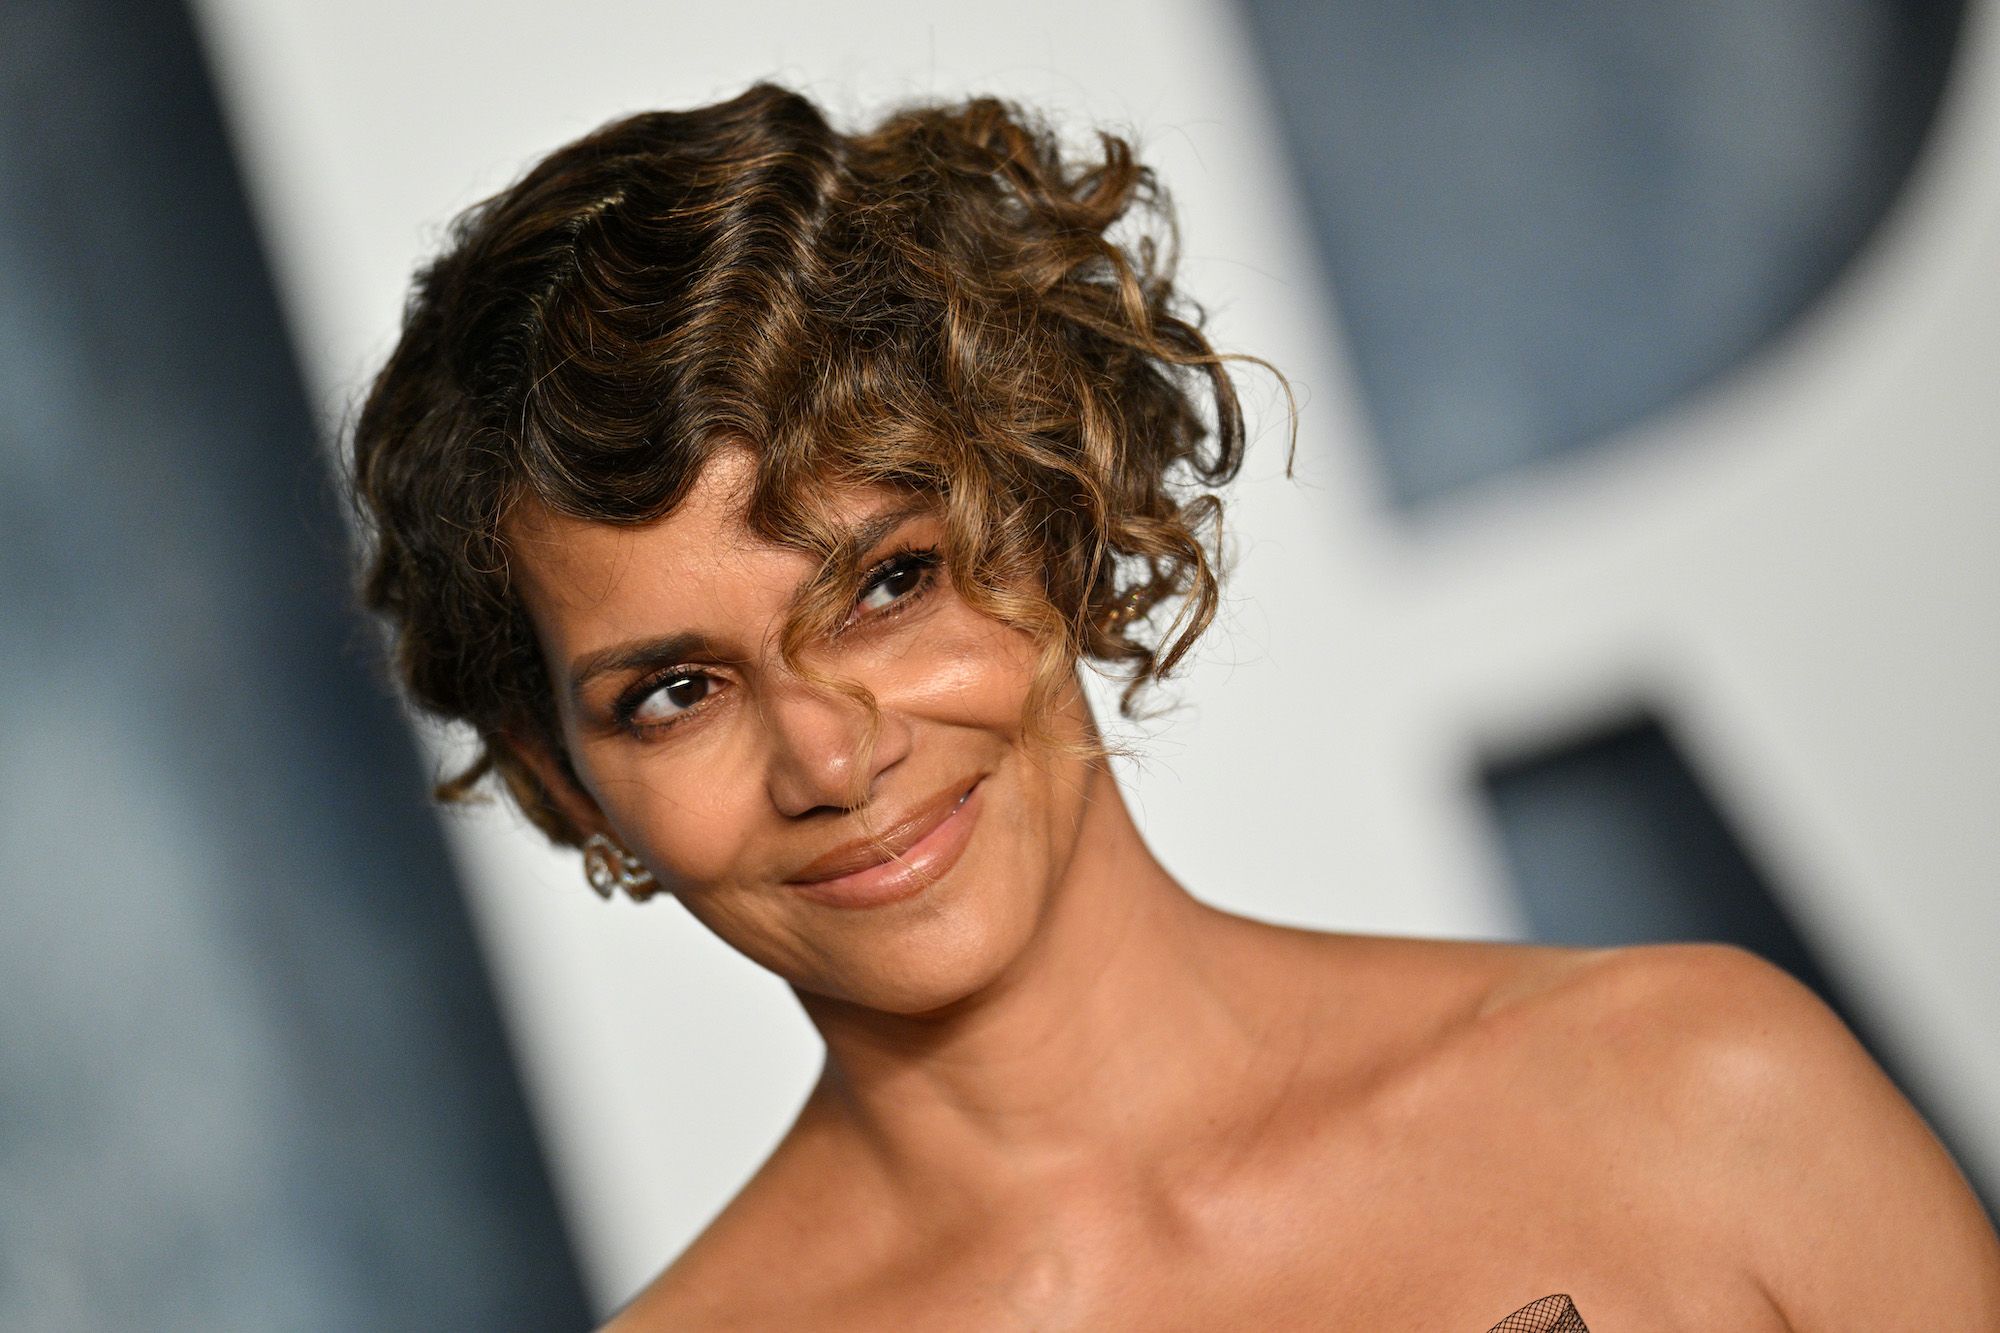 Halle Berry Poses Nude While Drinking Wine on Her Balcony In New photo pic